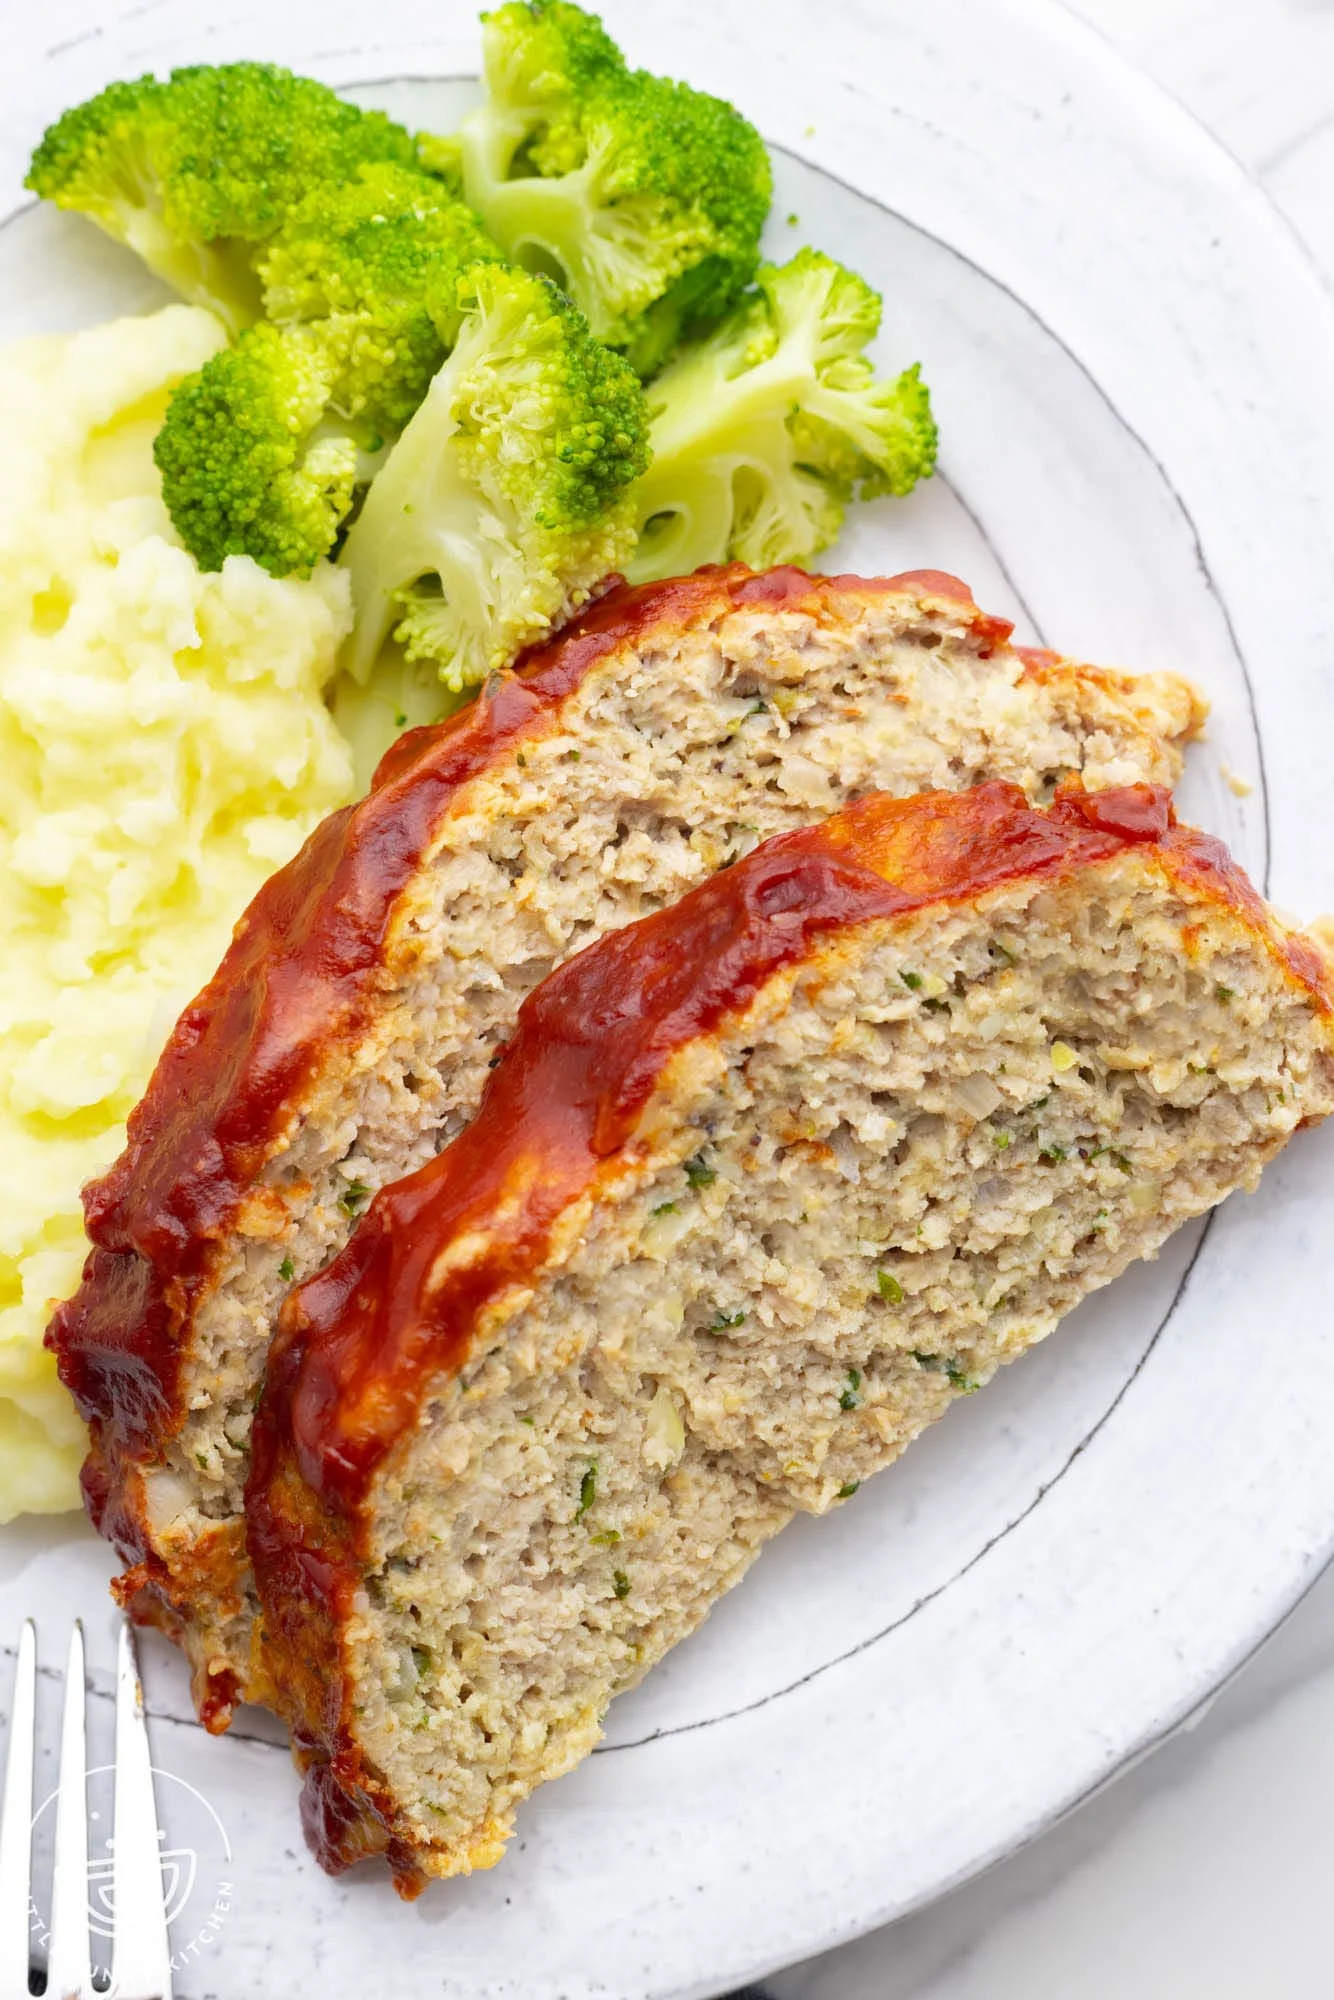 two slices of cooked chicken meatloaf with a red sauce topping on a round white plate with mashed potatoes and steamed broccoli